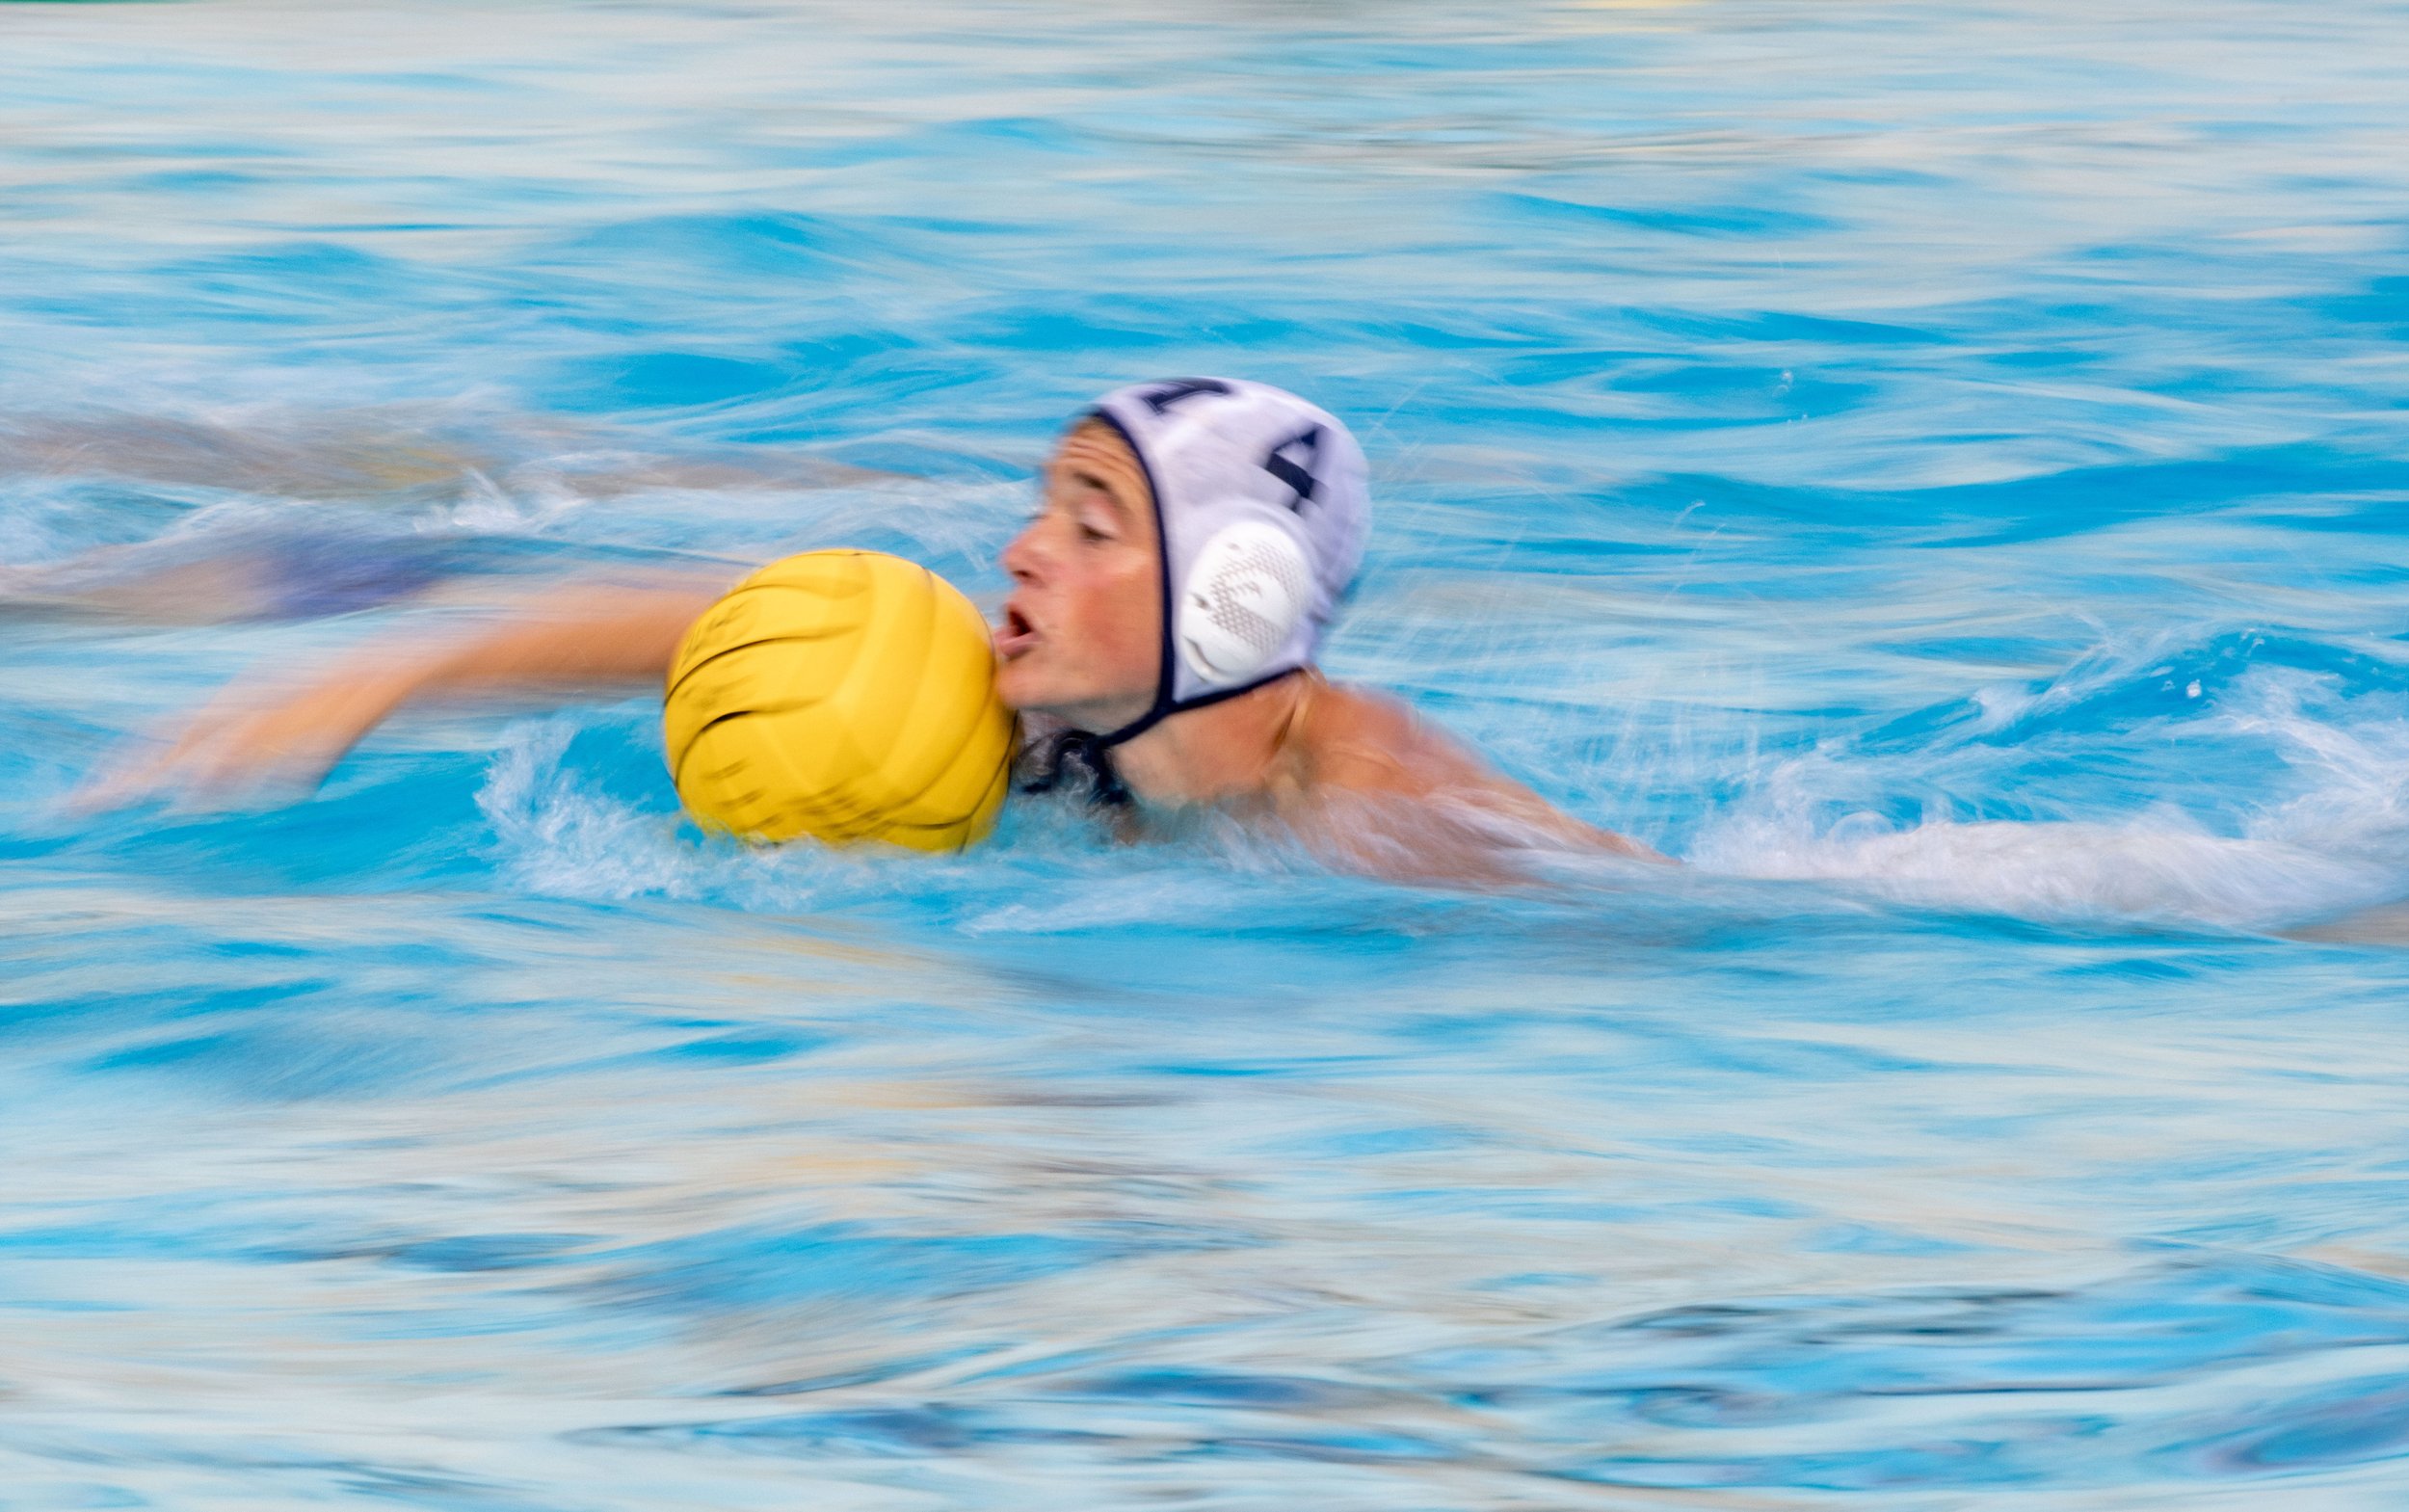  San Diego Mesa player Shane Cassidy (4) swims with the ball during a waterpolo game at Santa Monica College in Santa Monica, Calif., on Friday, Oct. 21, 2022. (Ethan Swope | The Corsair)   